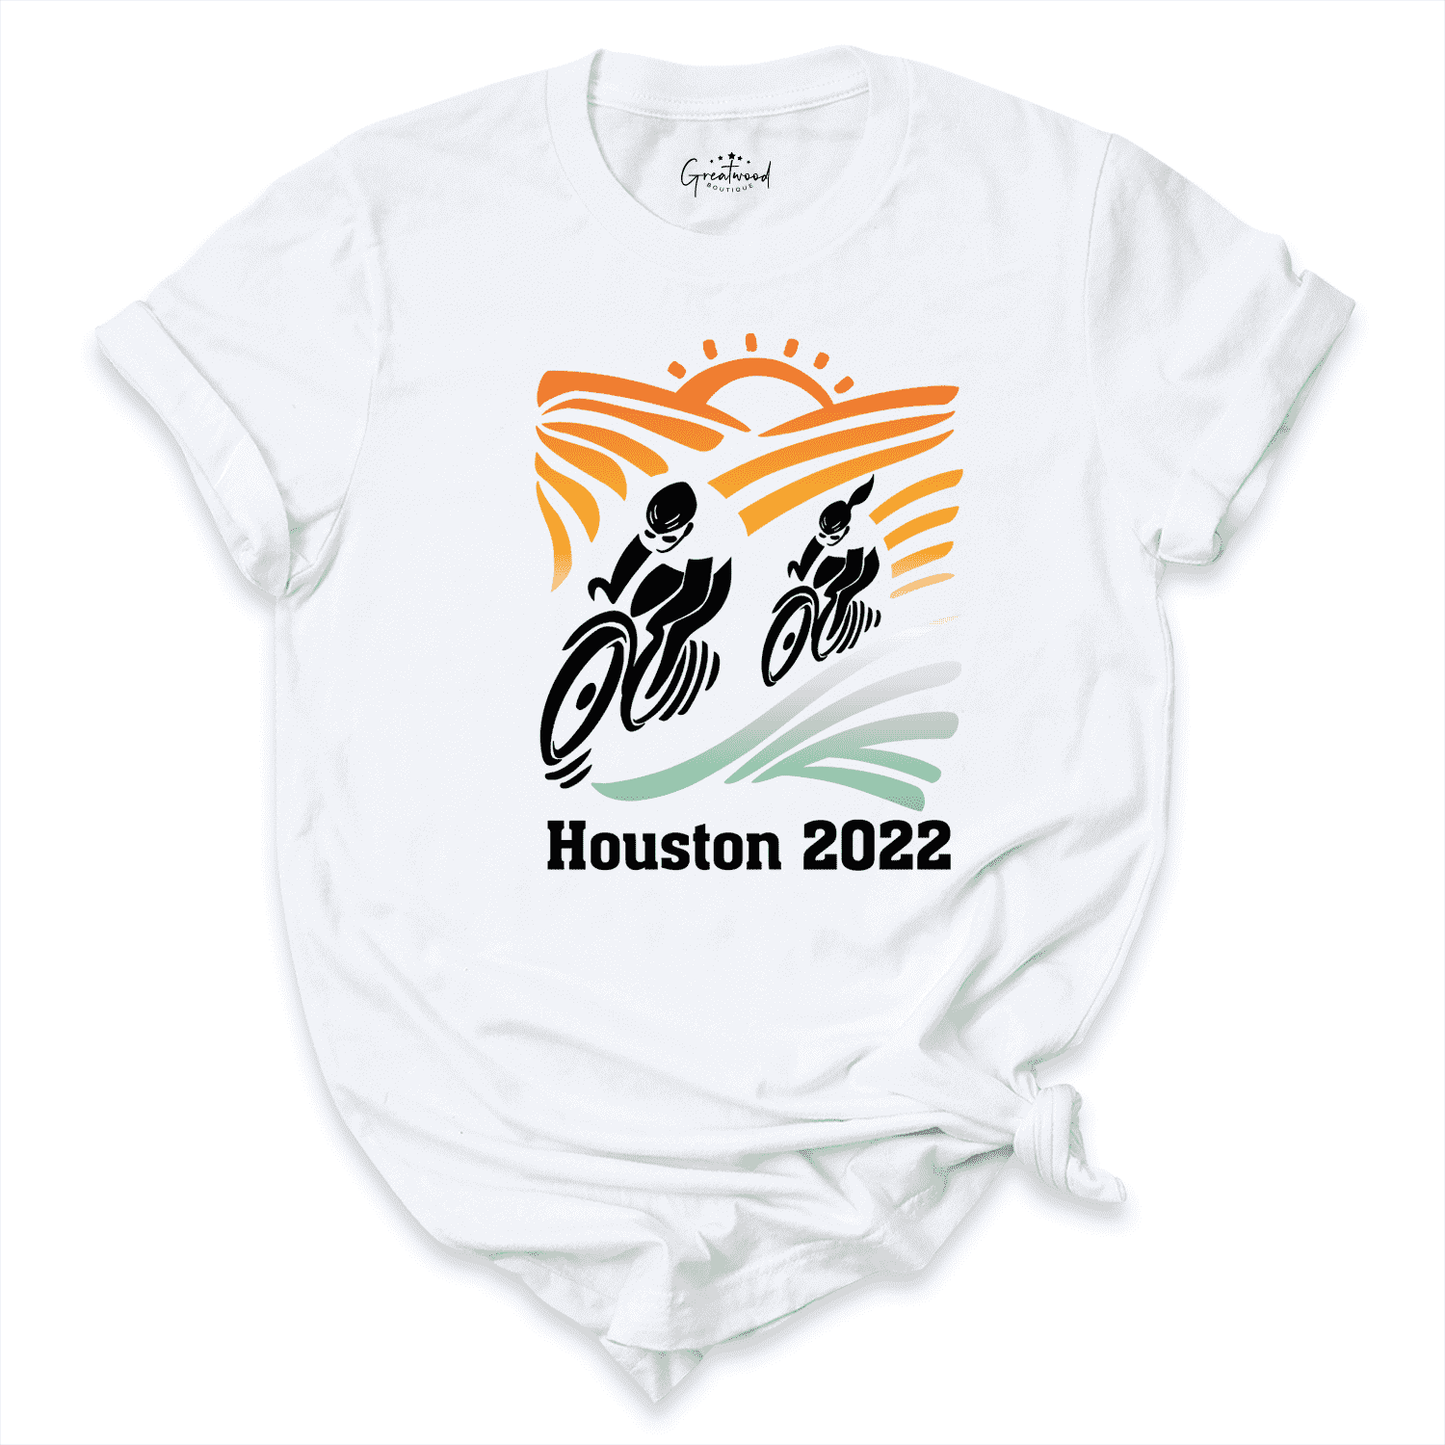 Houston 2022 Cycling Shirt White - Greatwood Boutique